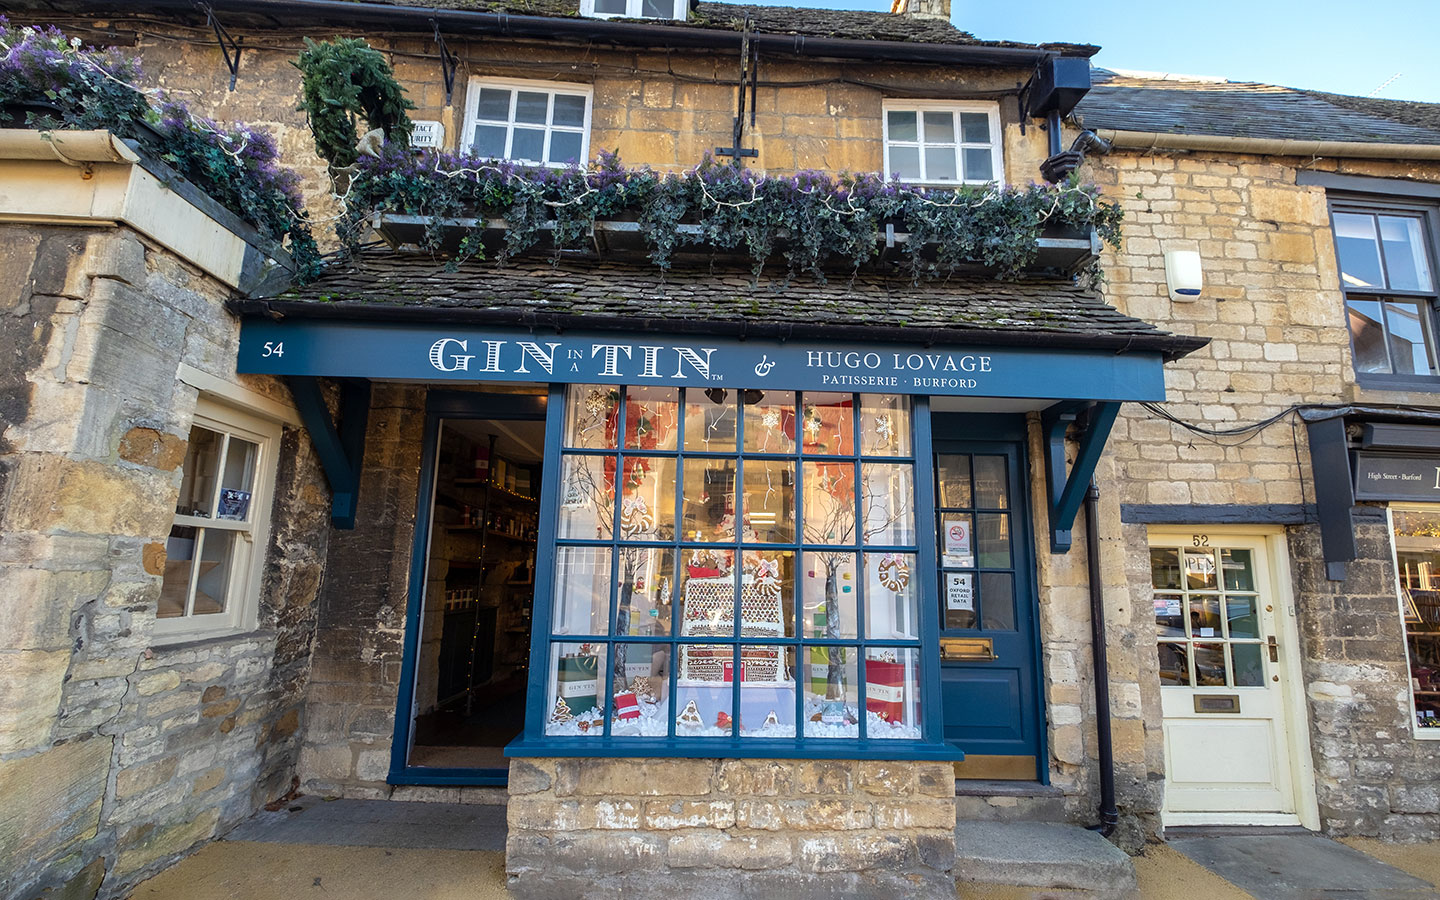 Shops in Burford in the Cotswolds